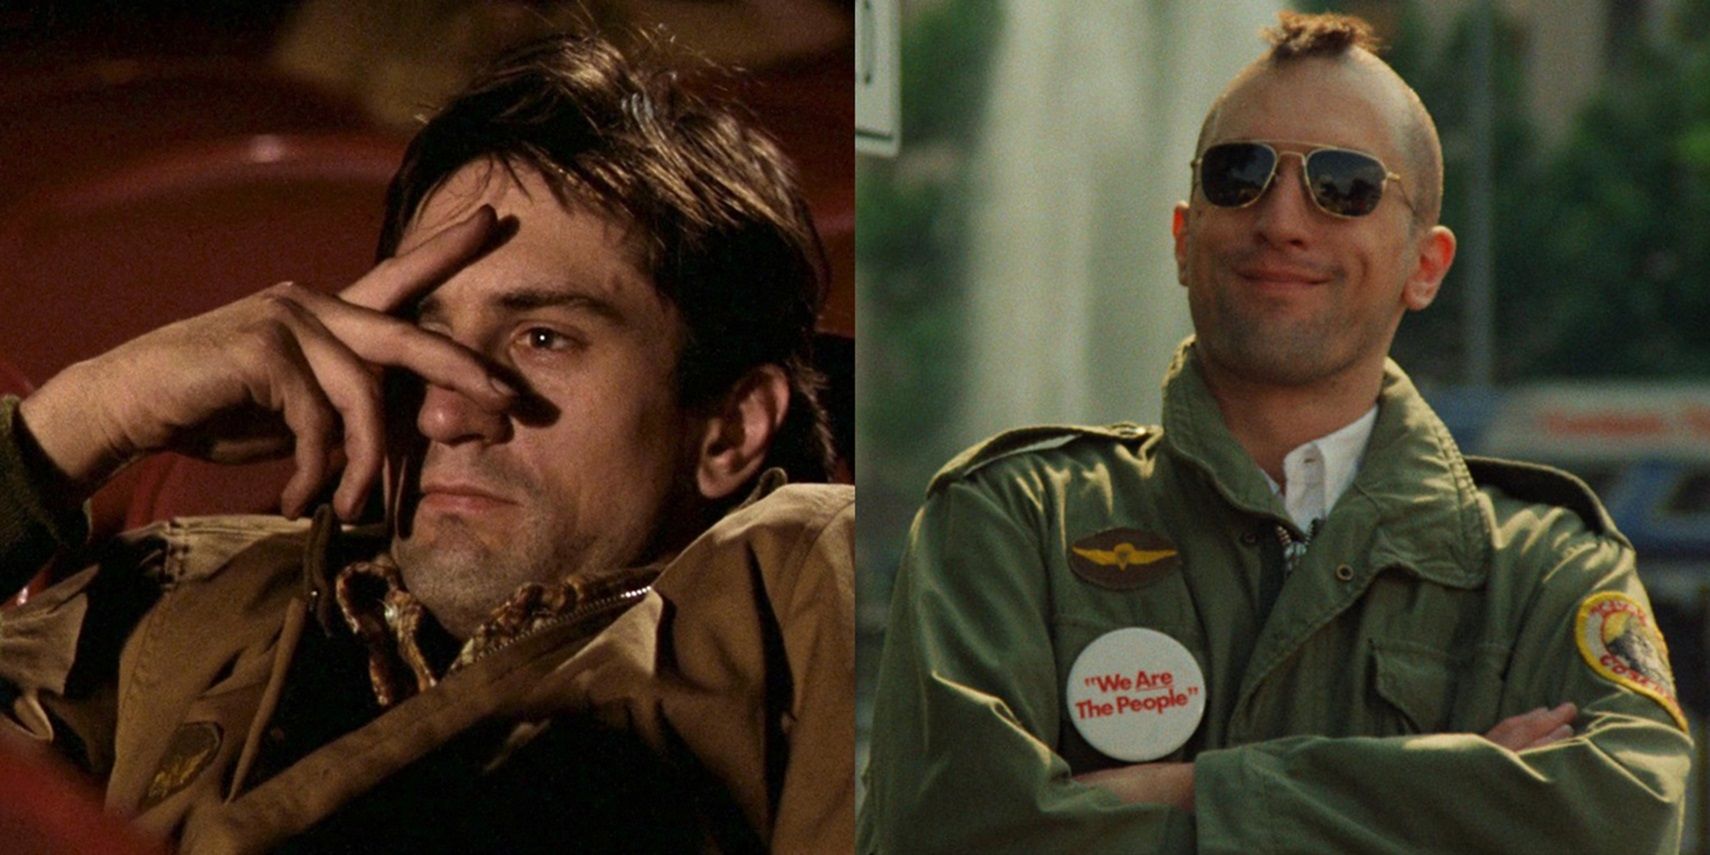 Robert De Niro as Travis Bickle in a movie theater and on the street in Taxi Driver